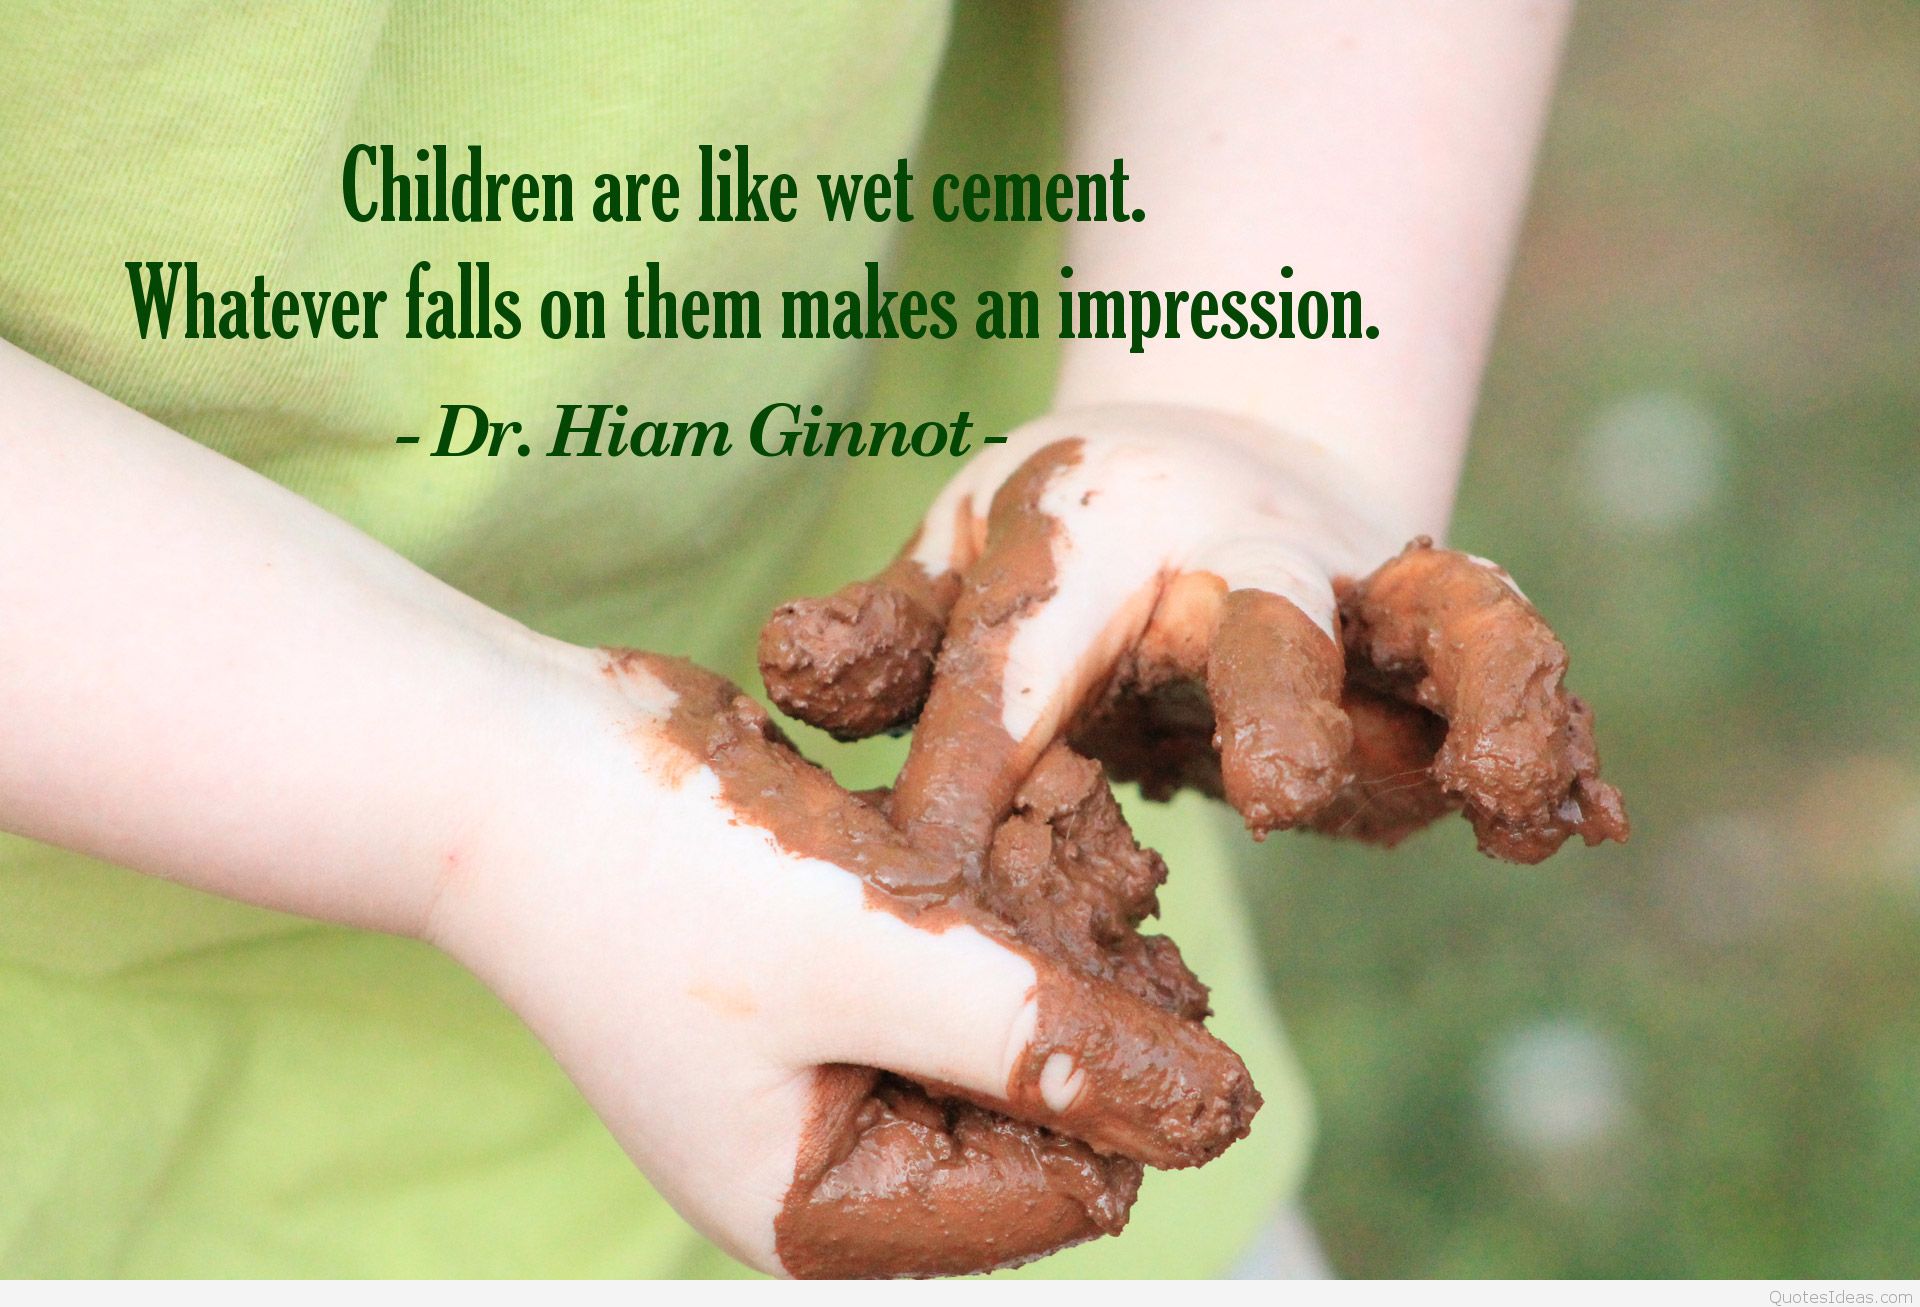 Children are wet like cement.whatever falls on them makes an impression. - Dr. Hiam Ginnot